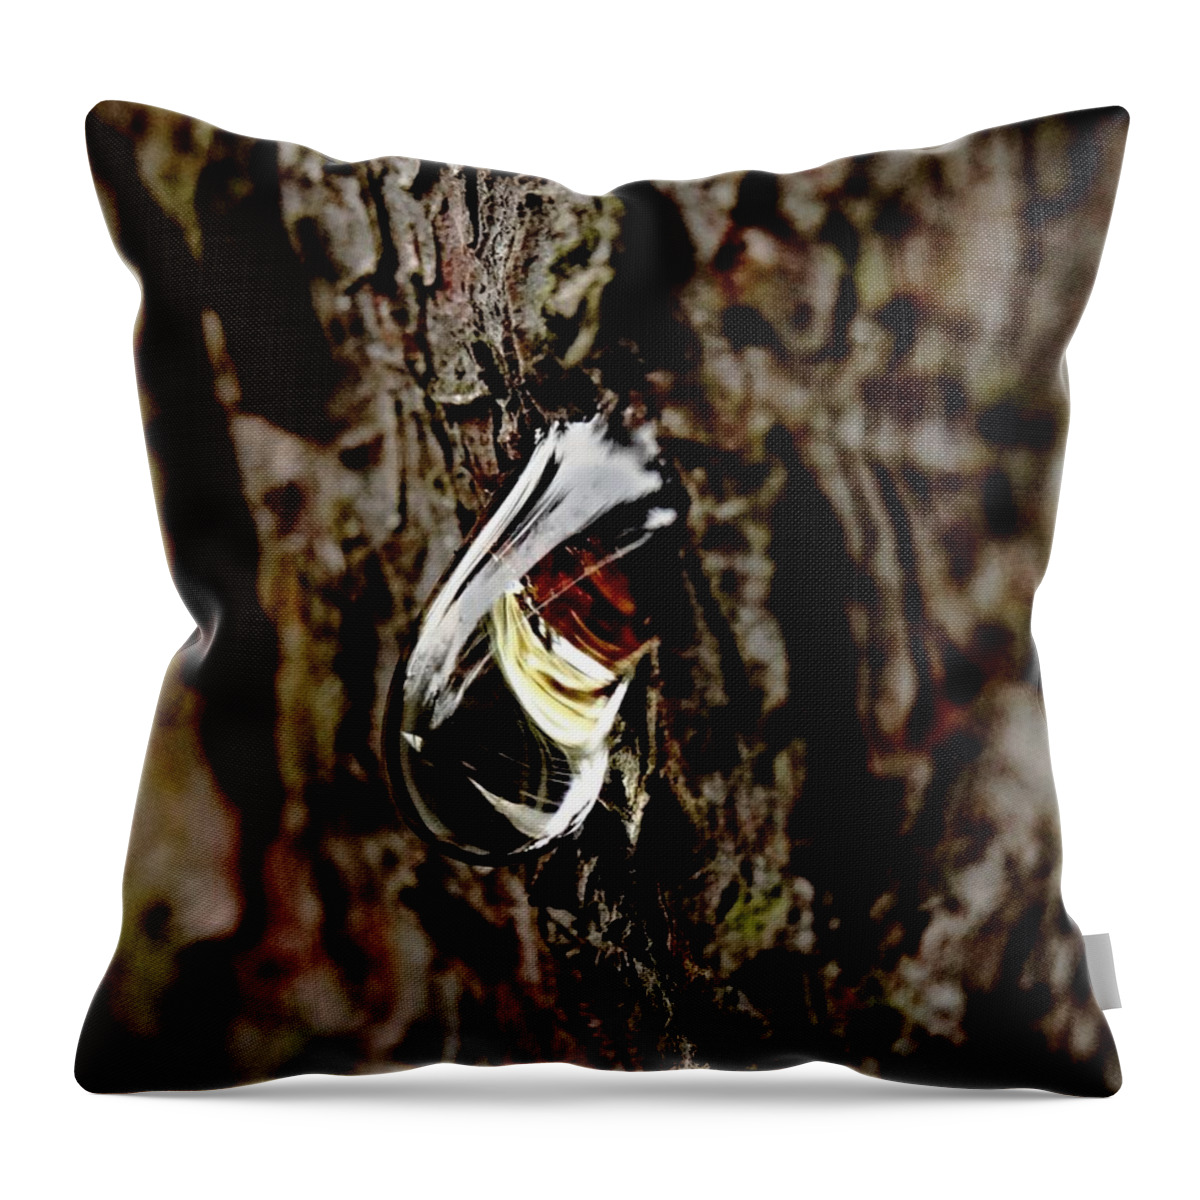 Resin Throw Pillow featuring the photograph Resin Tear by Nick Kloepping